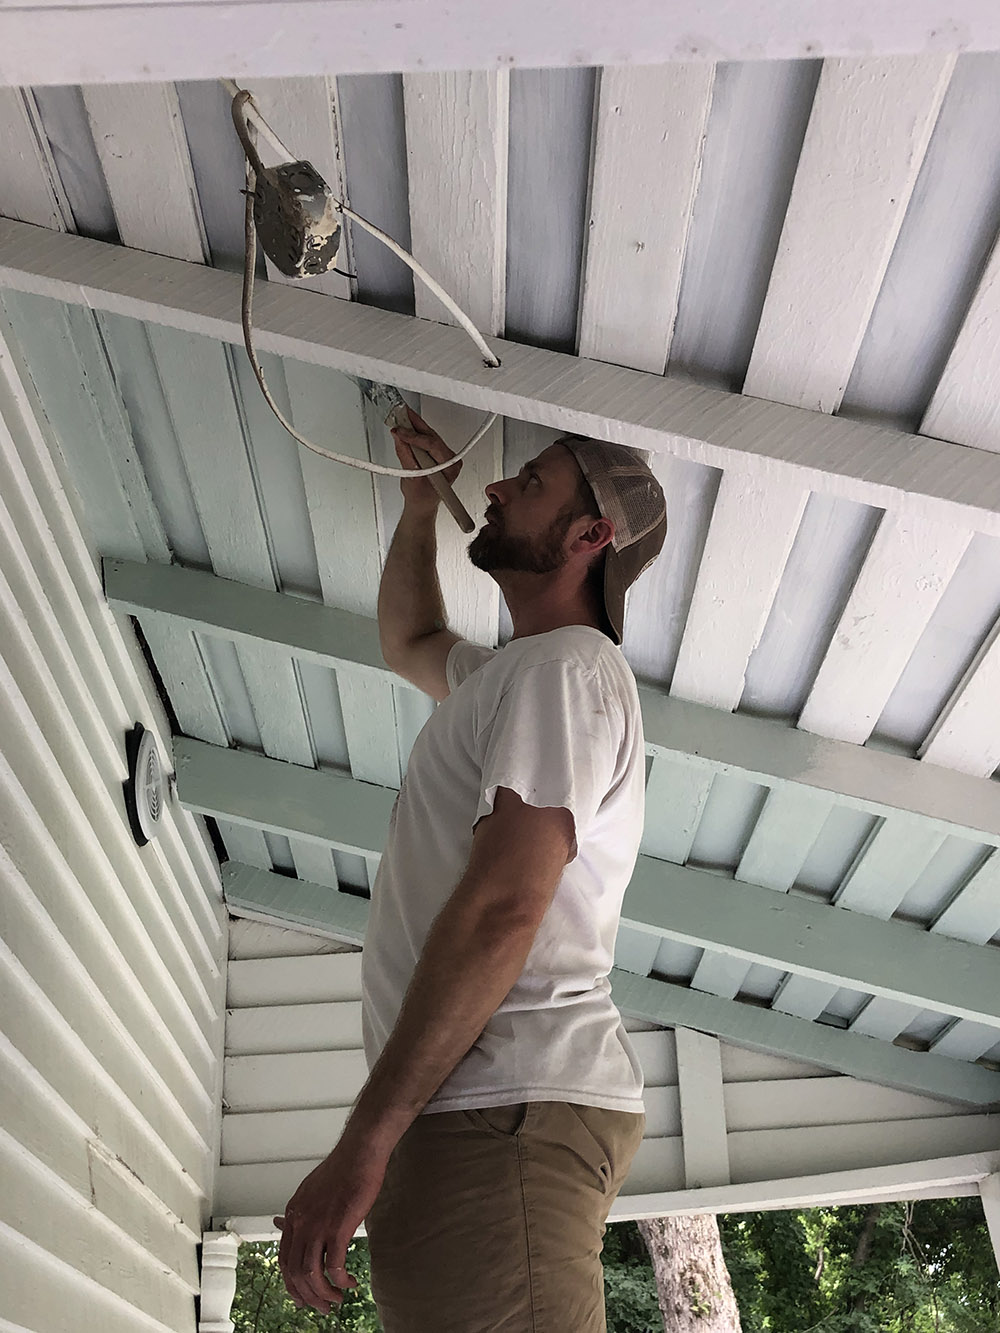 A man paints the ceiling of a porch in a light blue color.